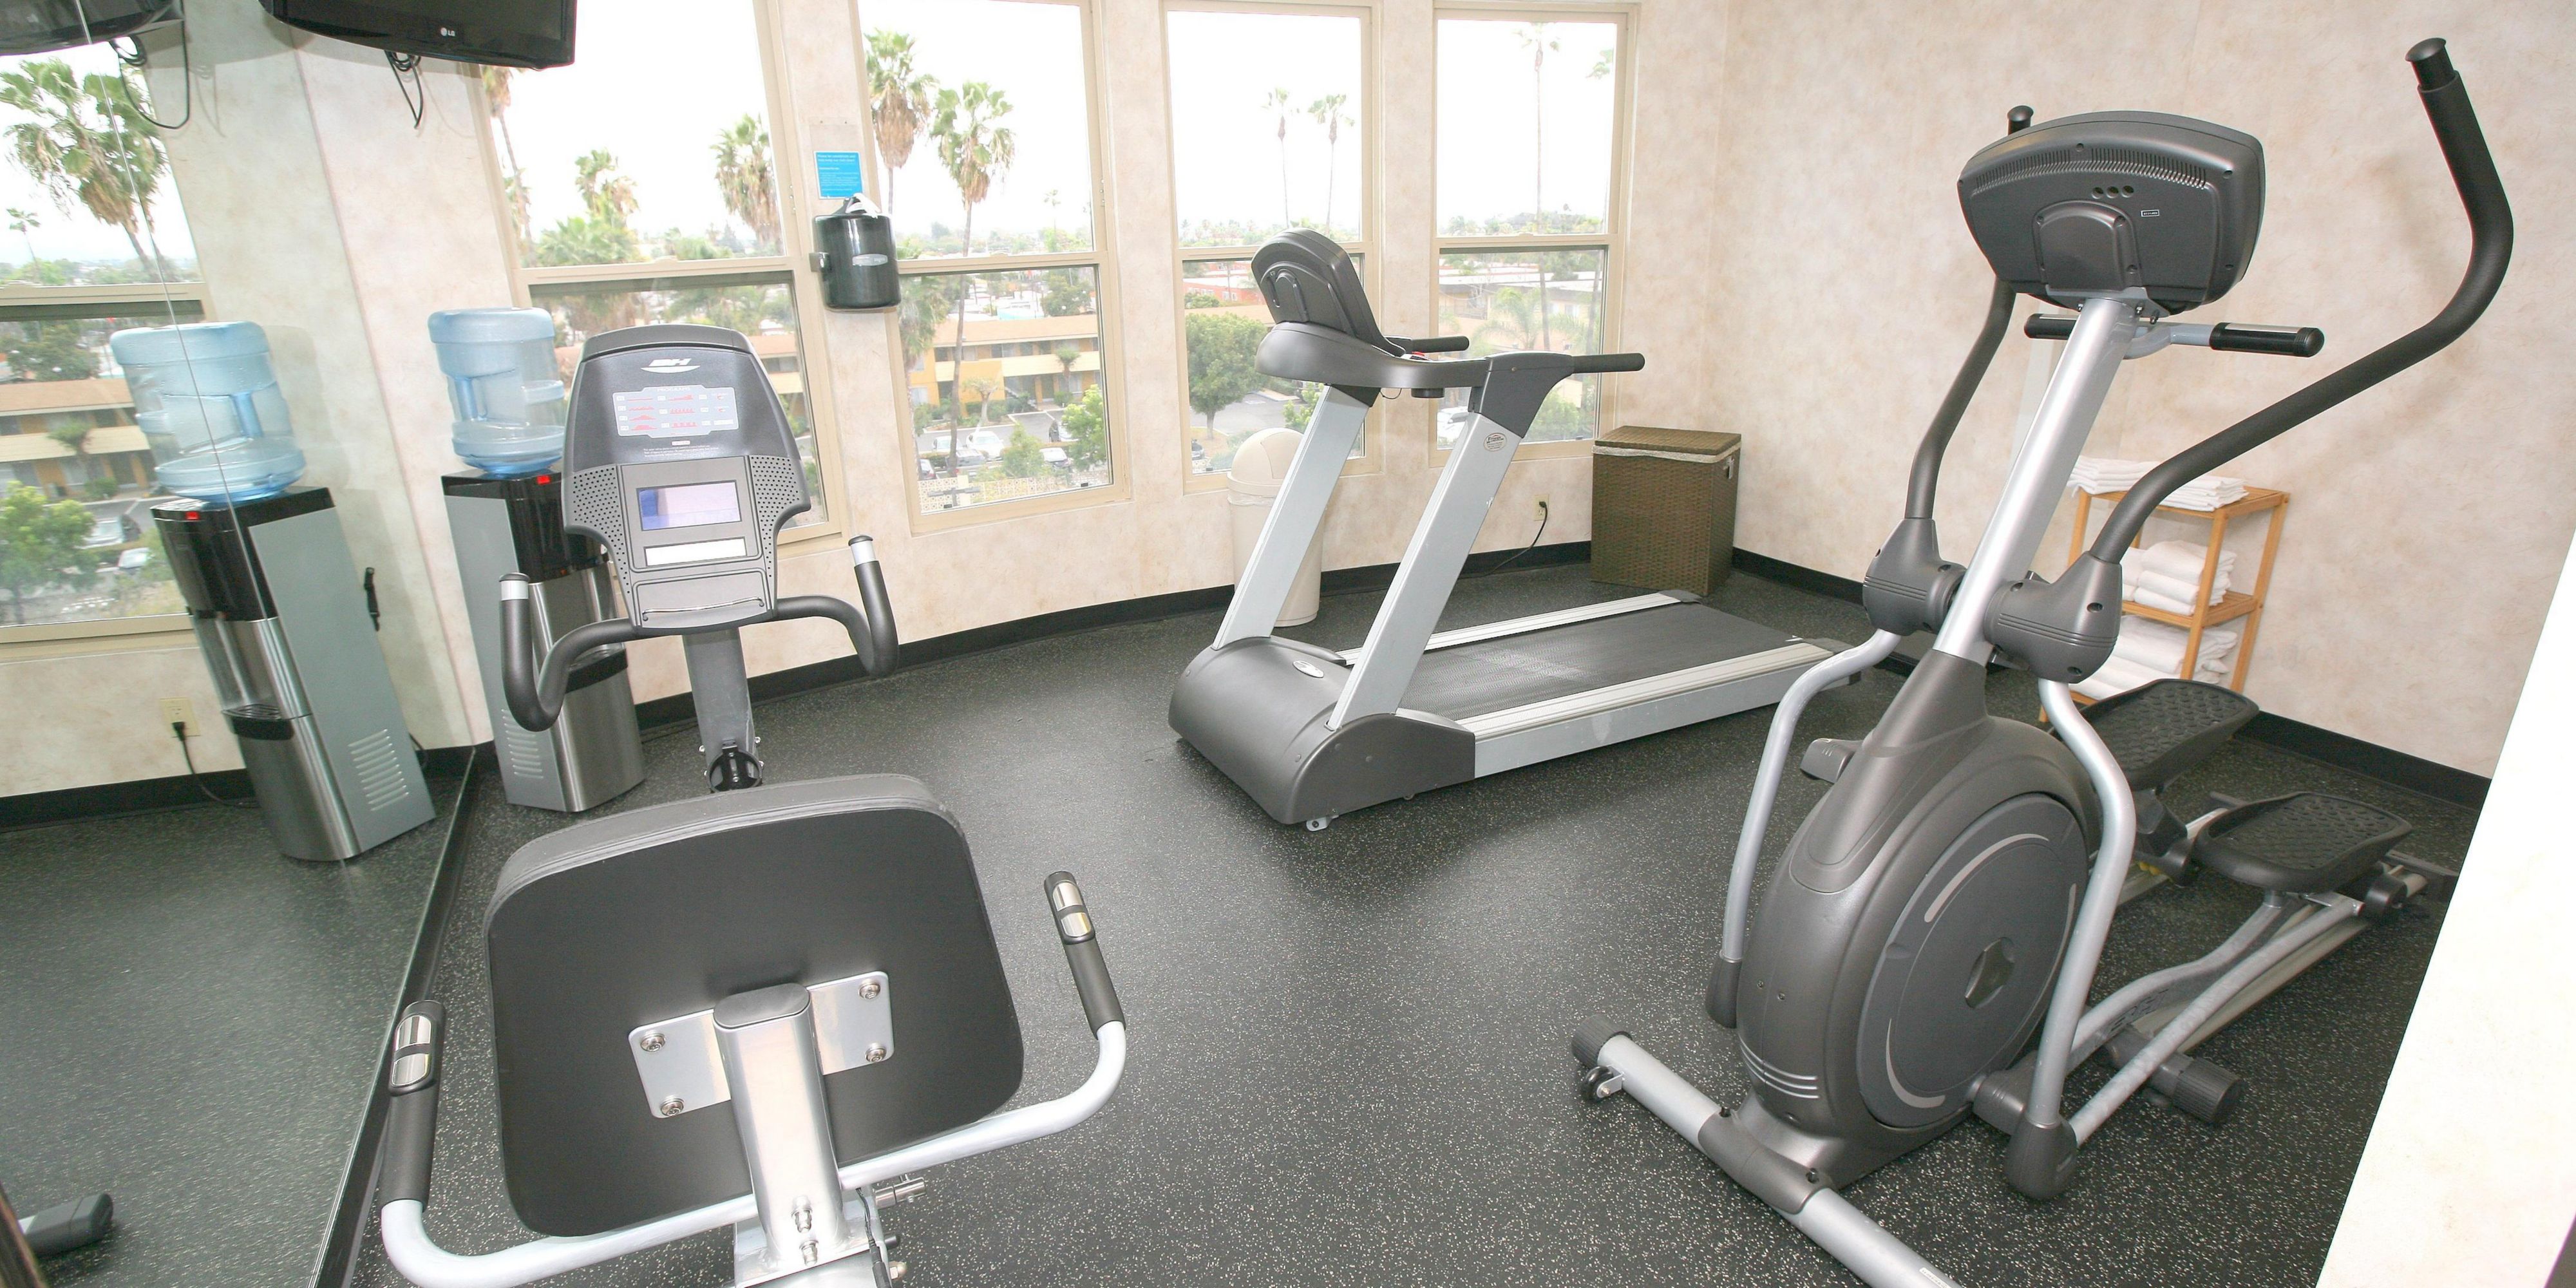 Fitness center is open 24 hours and is equipped with Treadmill, Stationary Bike & Elliptical, flat screen TV, water cooler and scale. Fitness center is located on the top floor with a beautiful evening view of the city lights.